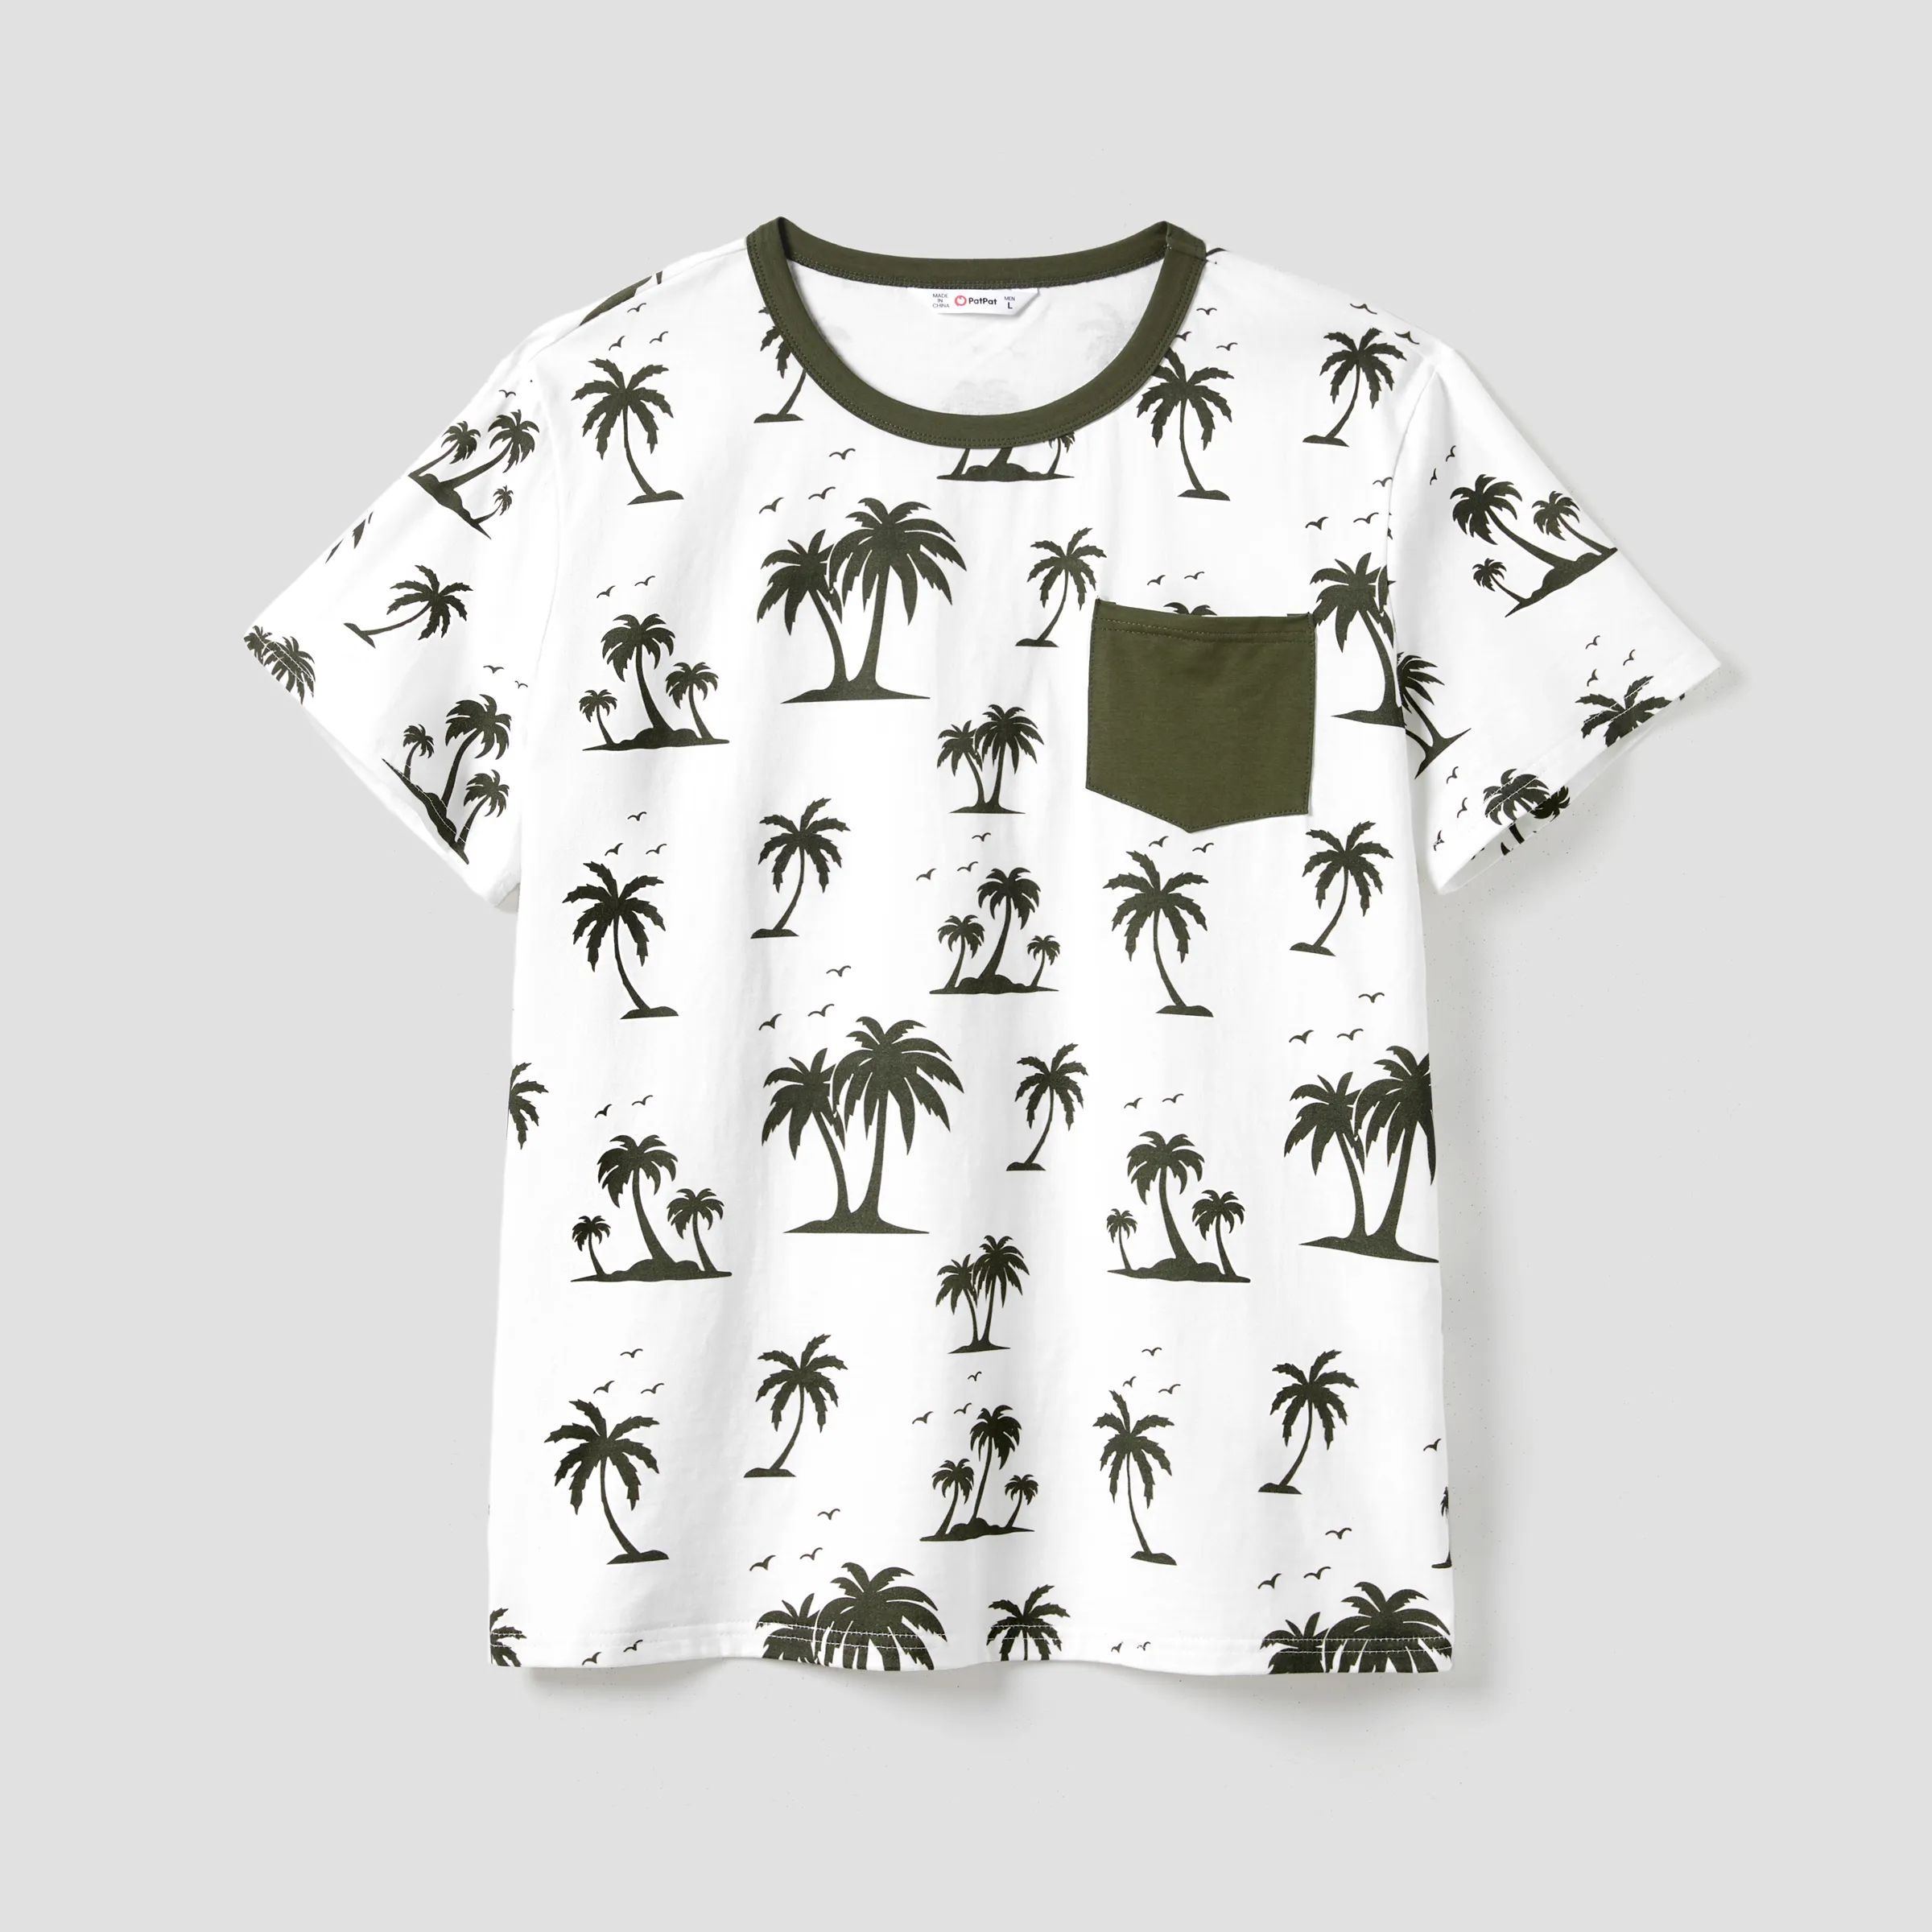 Family Matching Sets Allover Printed T-Shirt and Army Green Glasses Pattern T-Shirt Dress with Pocke